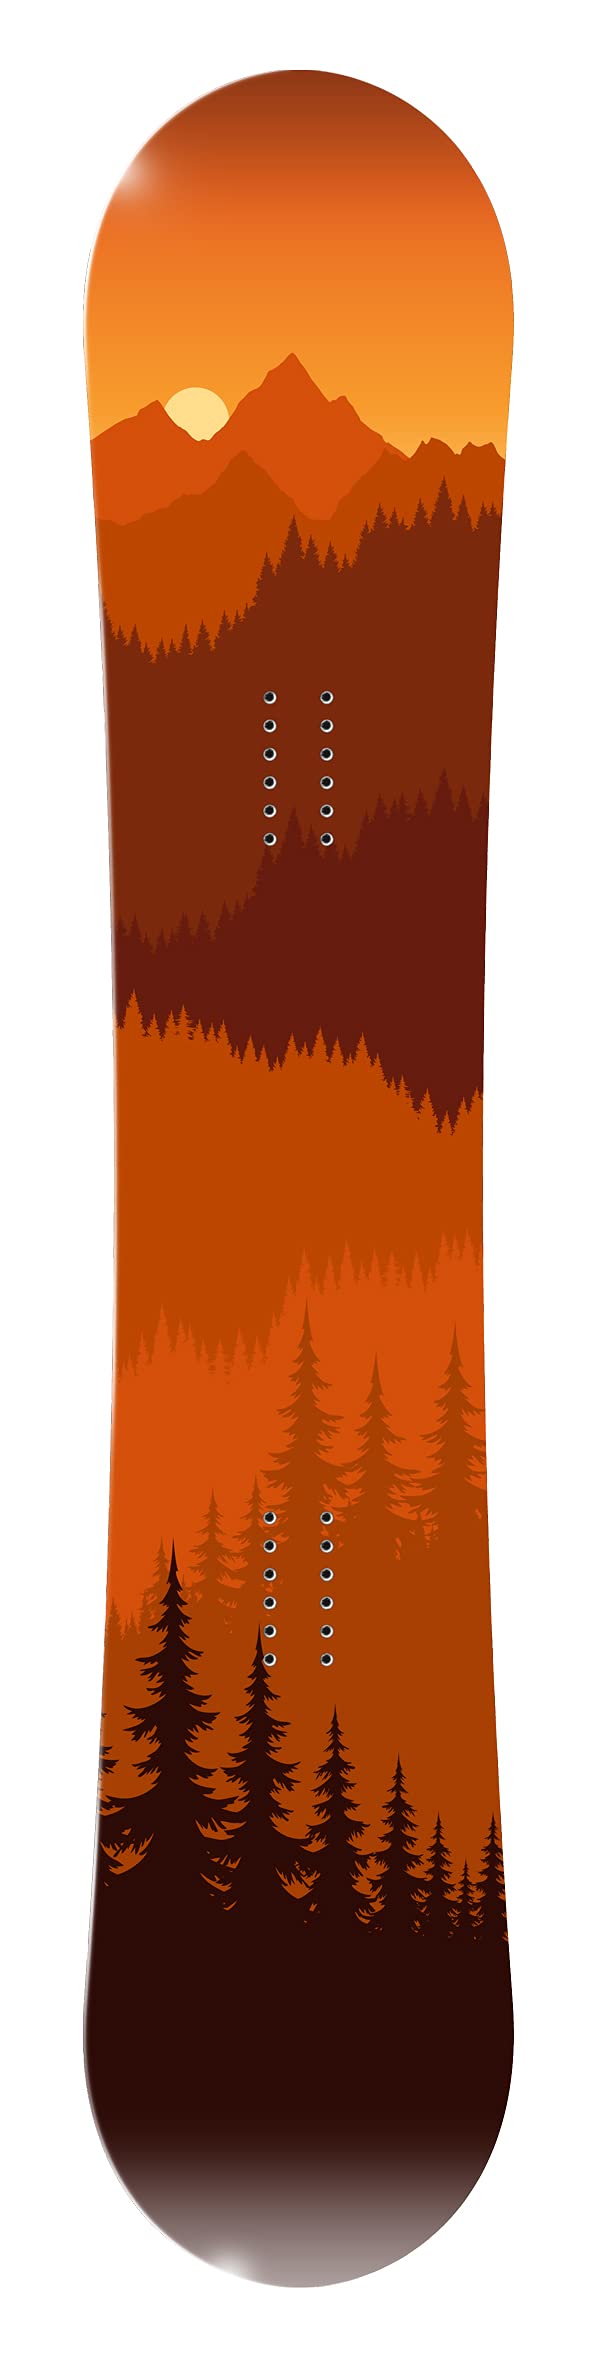 Snowboard Wrap 169 - Orange Mountains, Sunset, Trees Snowboard Graphic Decal - Includes Application Squeegee - 14 inch x 65 inch fits most snowboards